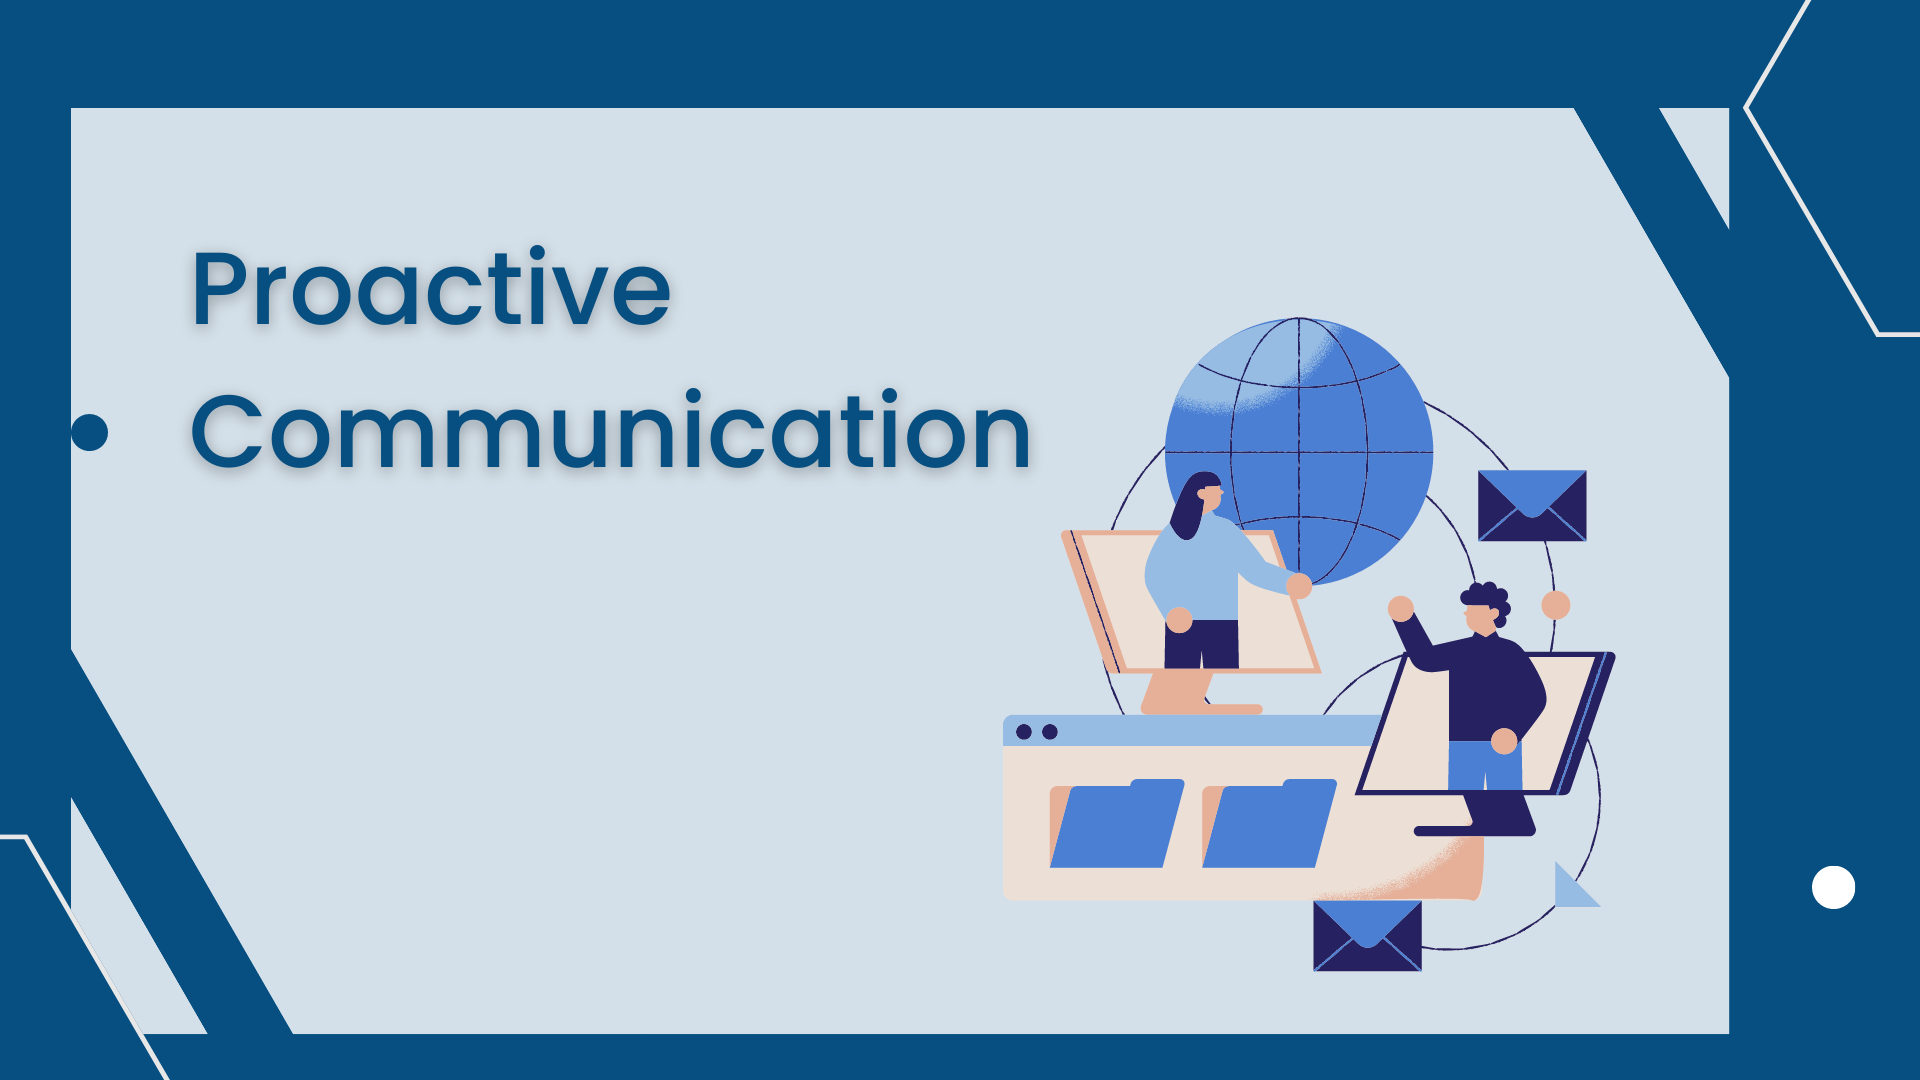 Proactive Communication for customer engagement